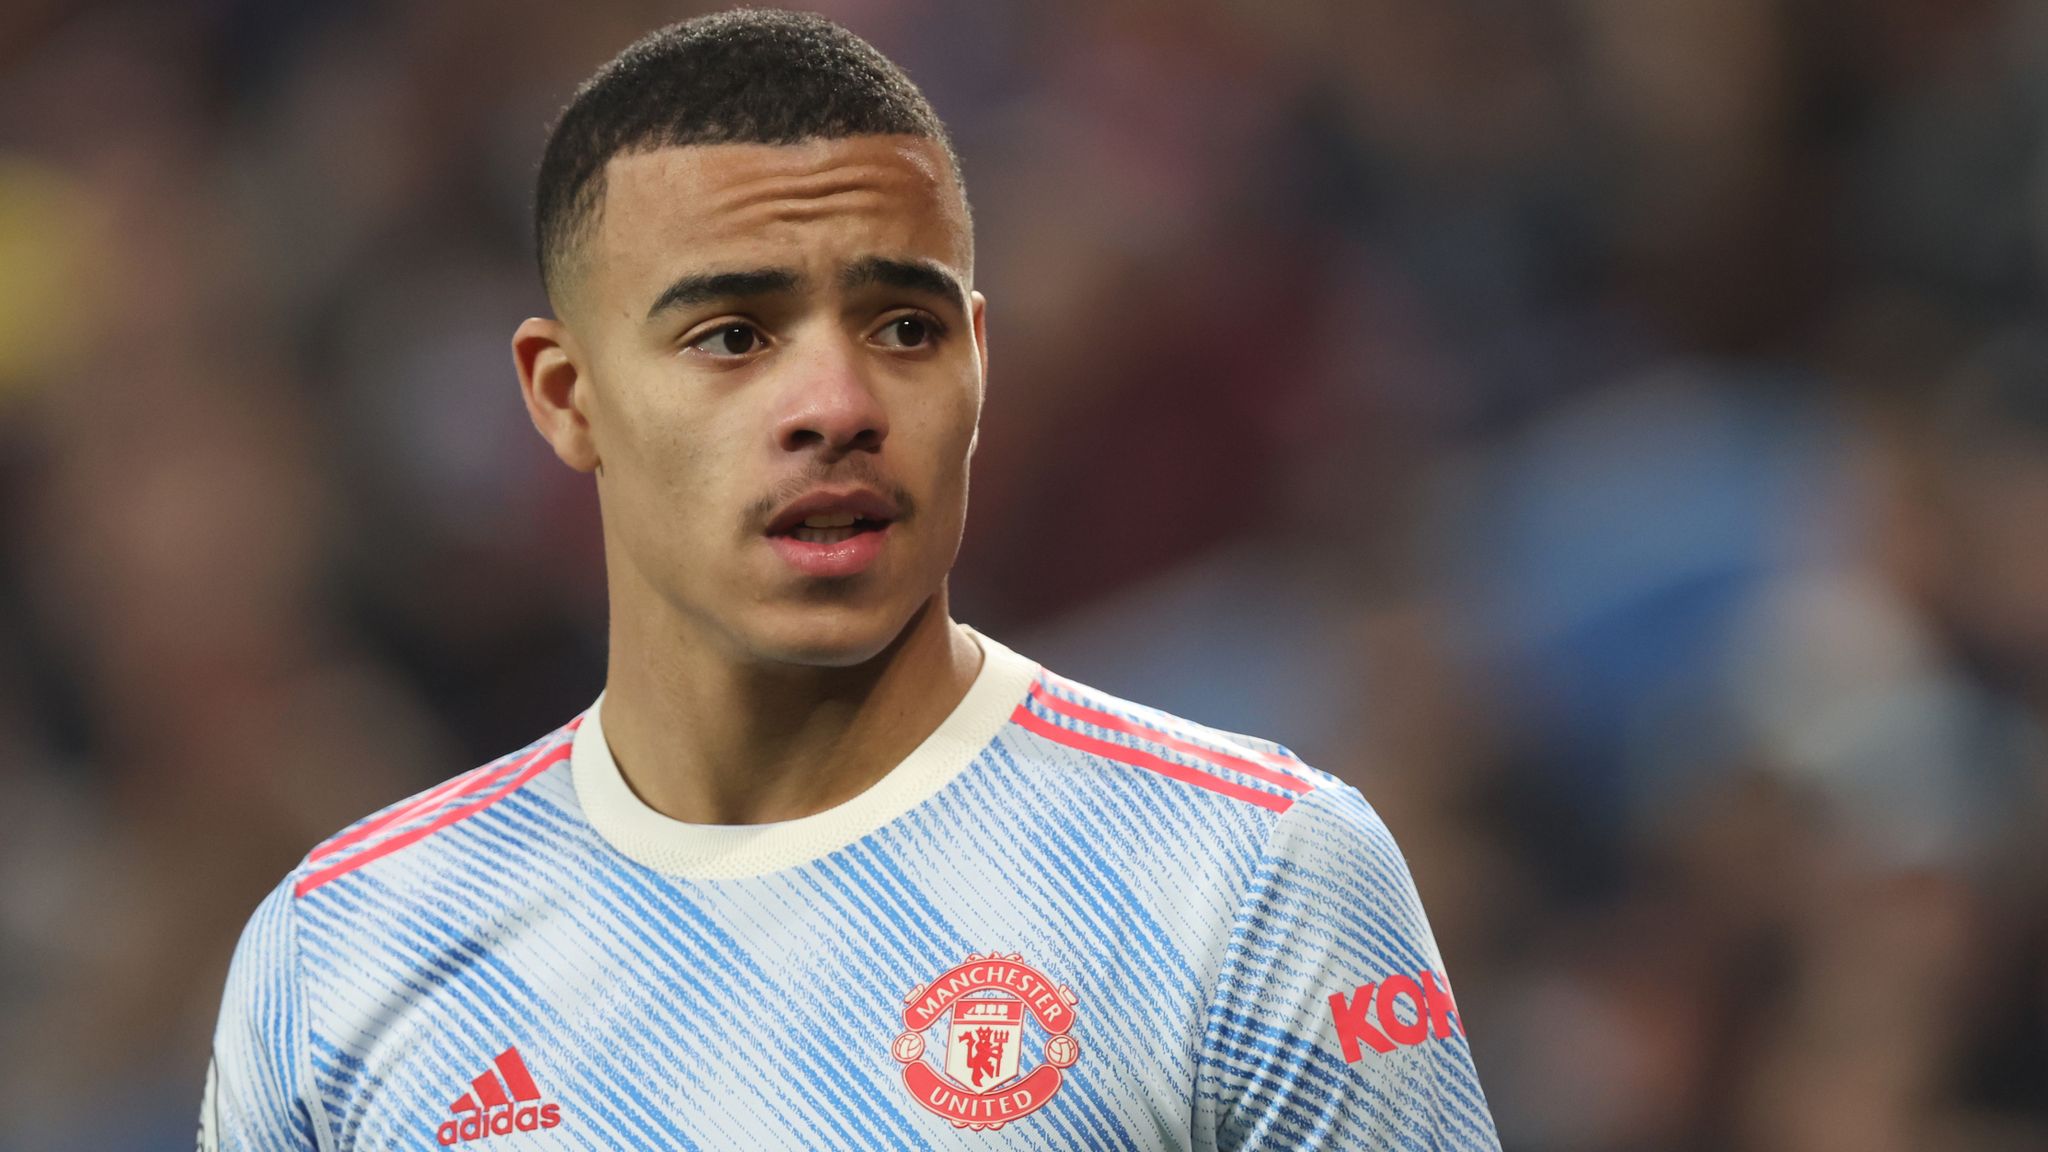 Man Utd’s Greenwood arrested over alleged breach of bail conditions